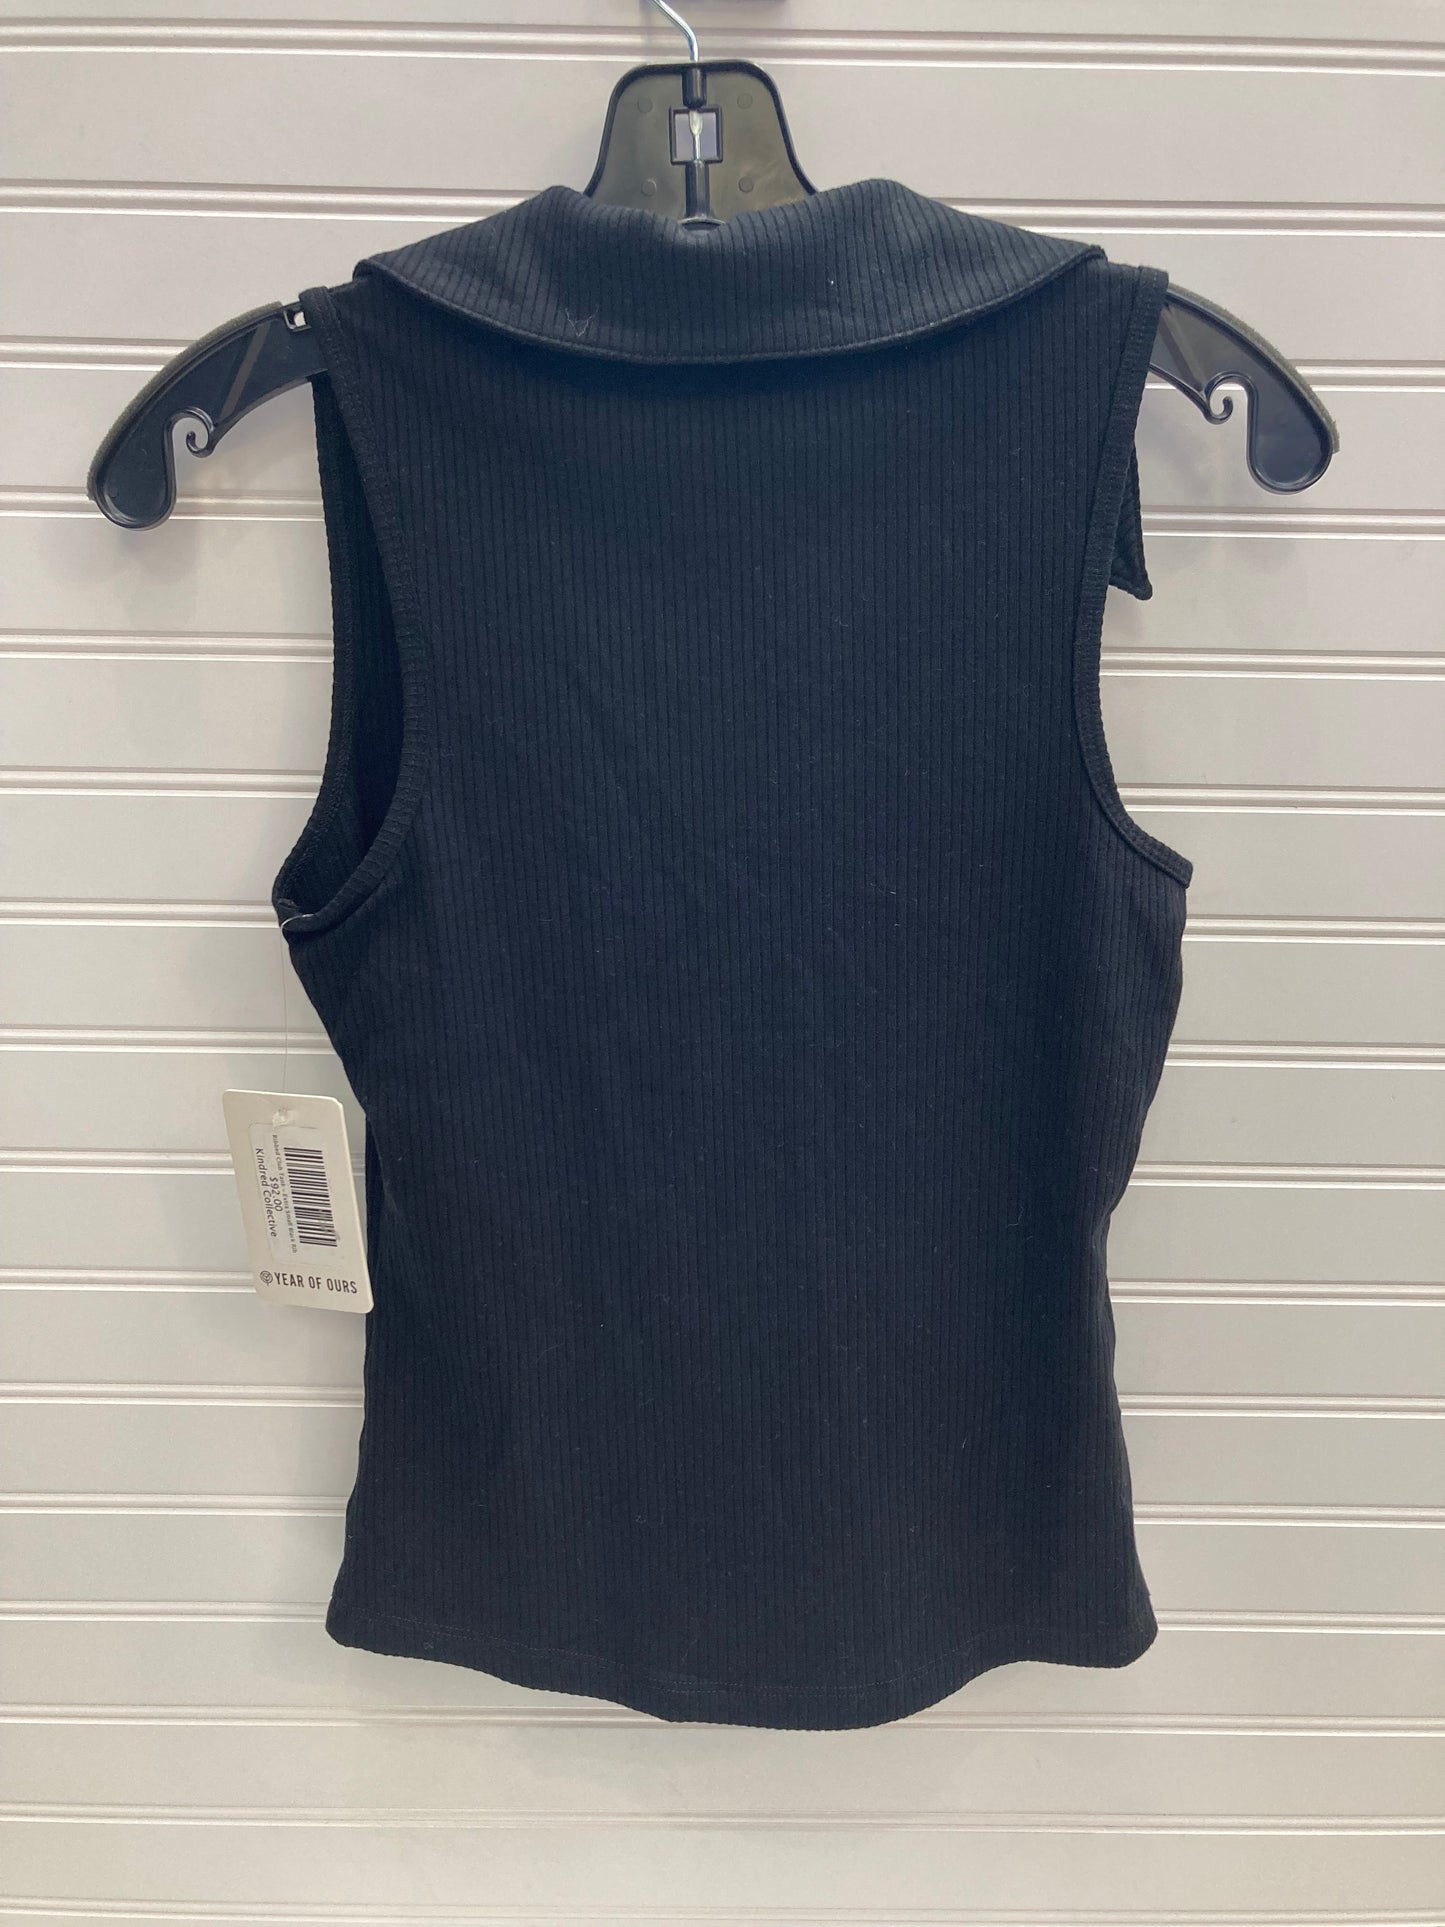 Black Top Sleeveless Year Of Ours, Size Xs